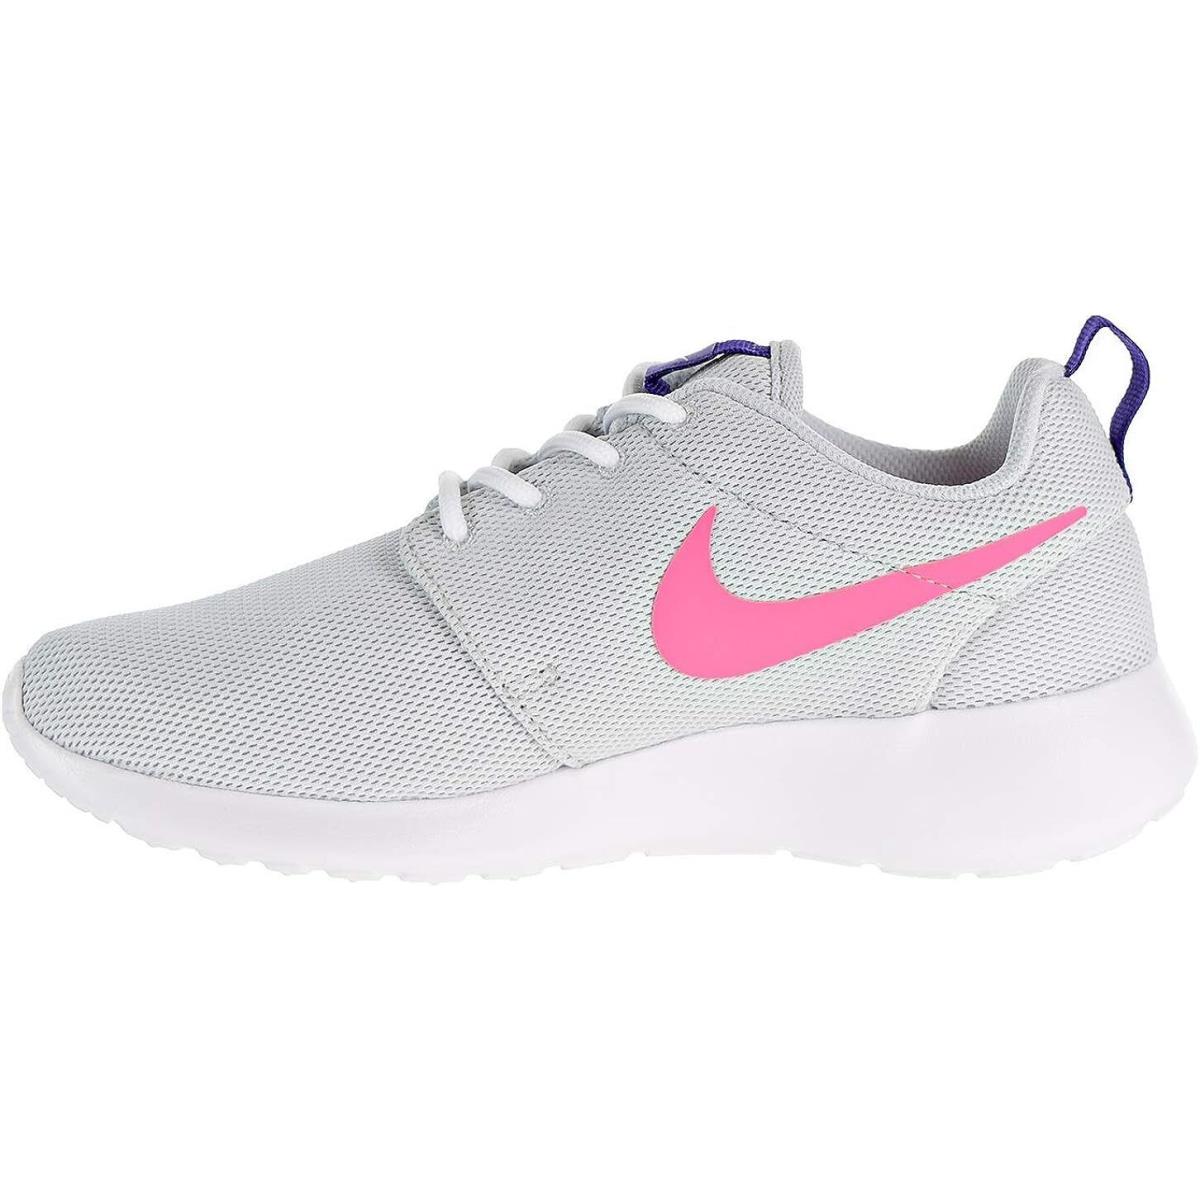 Nike Roshe One Platinum Pink Womens US9 Running Sneakers Shoes 7-10 - Multicolor